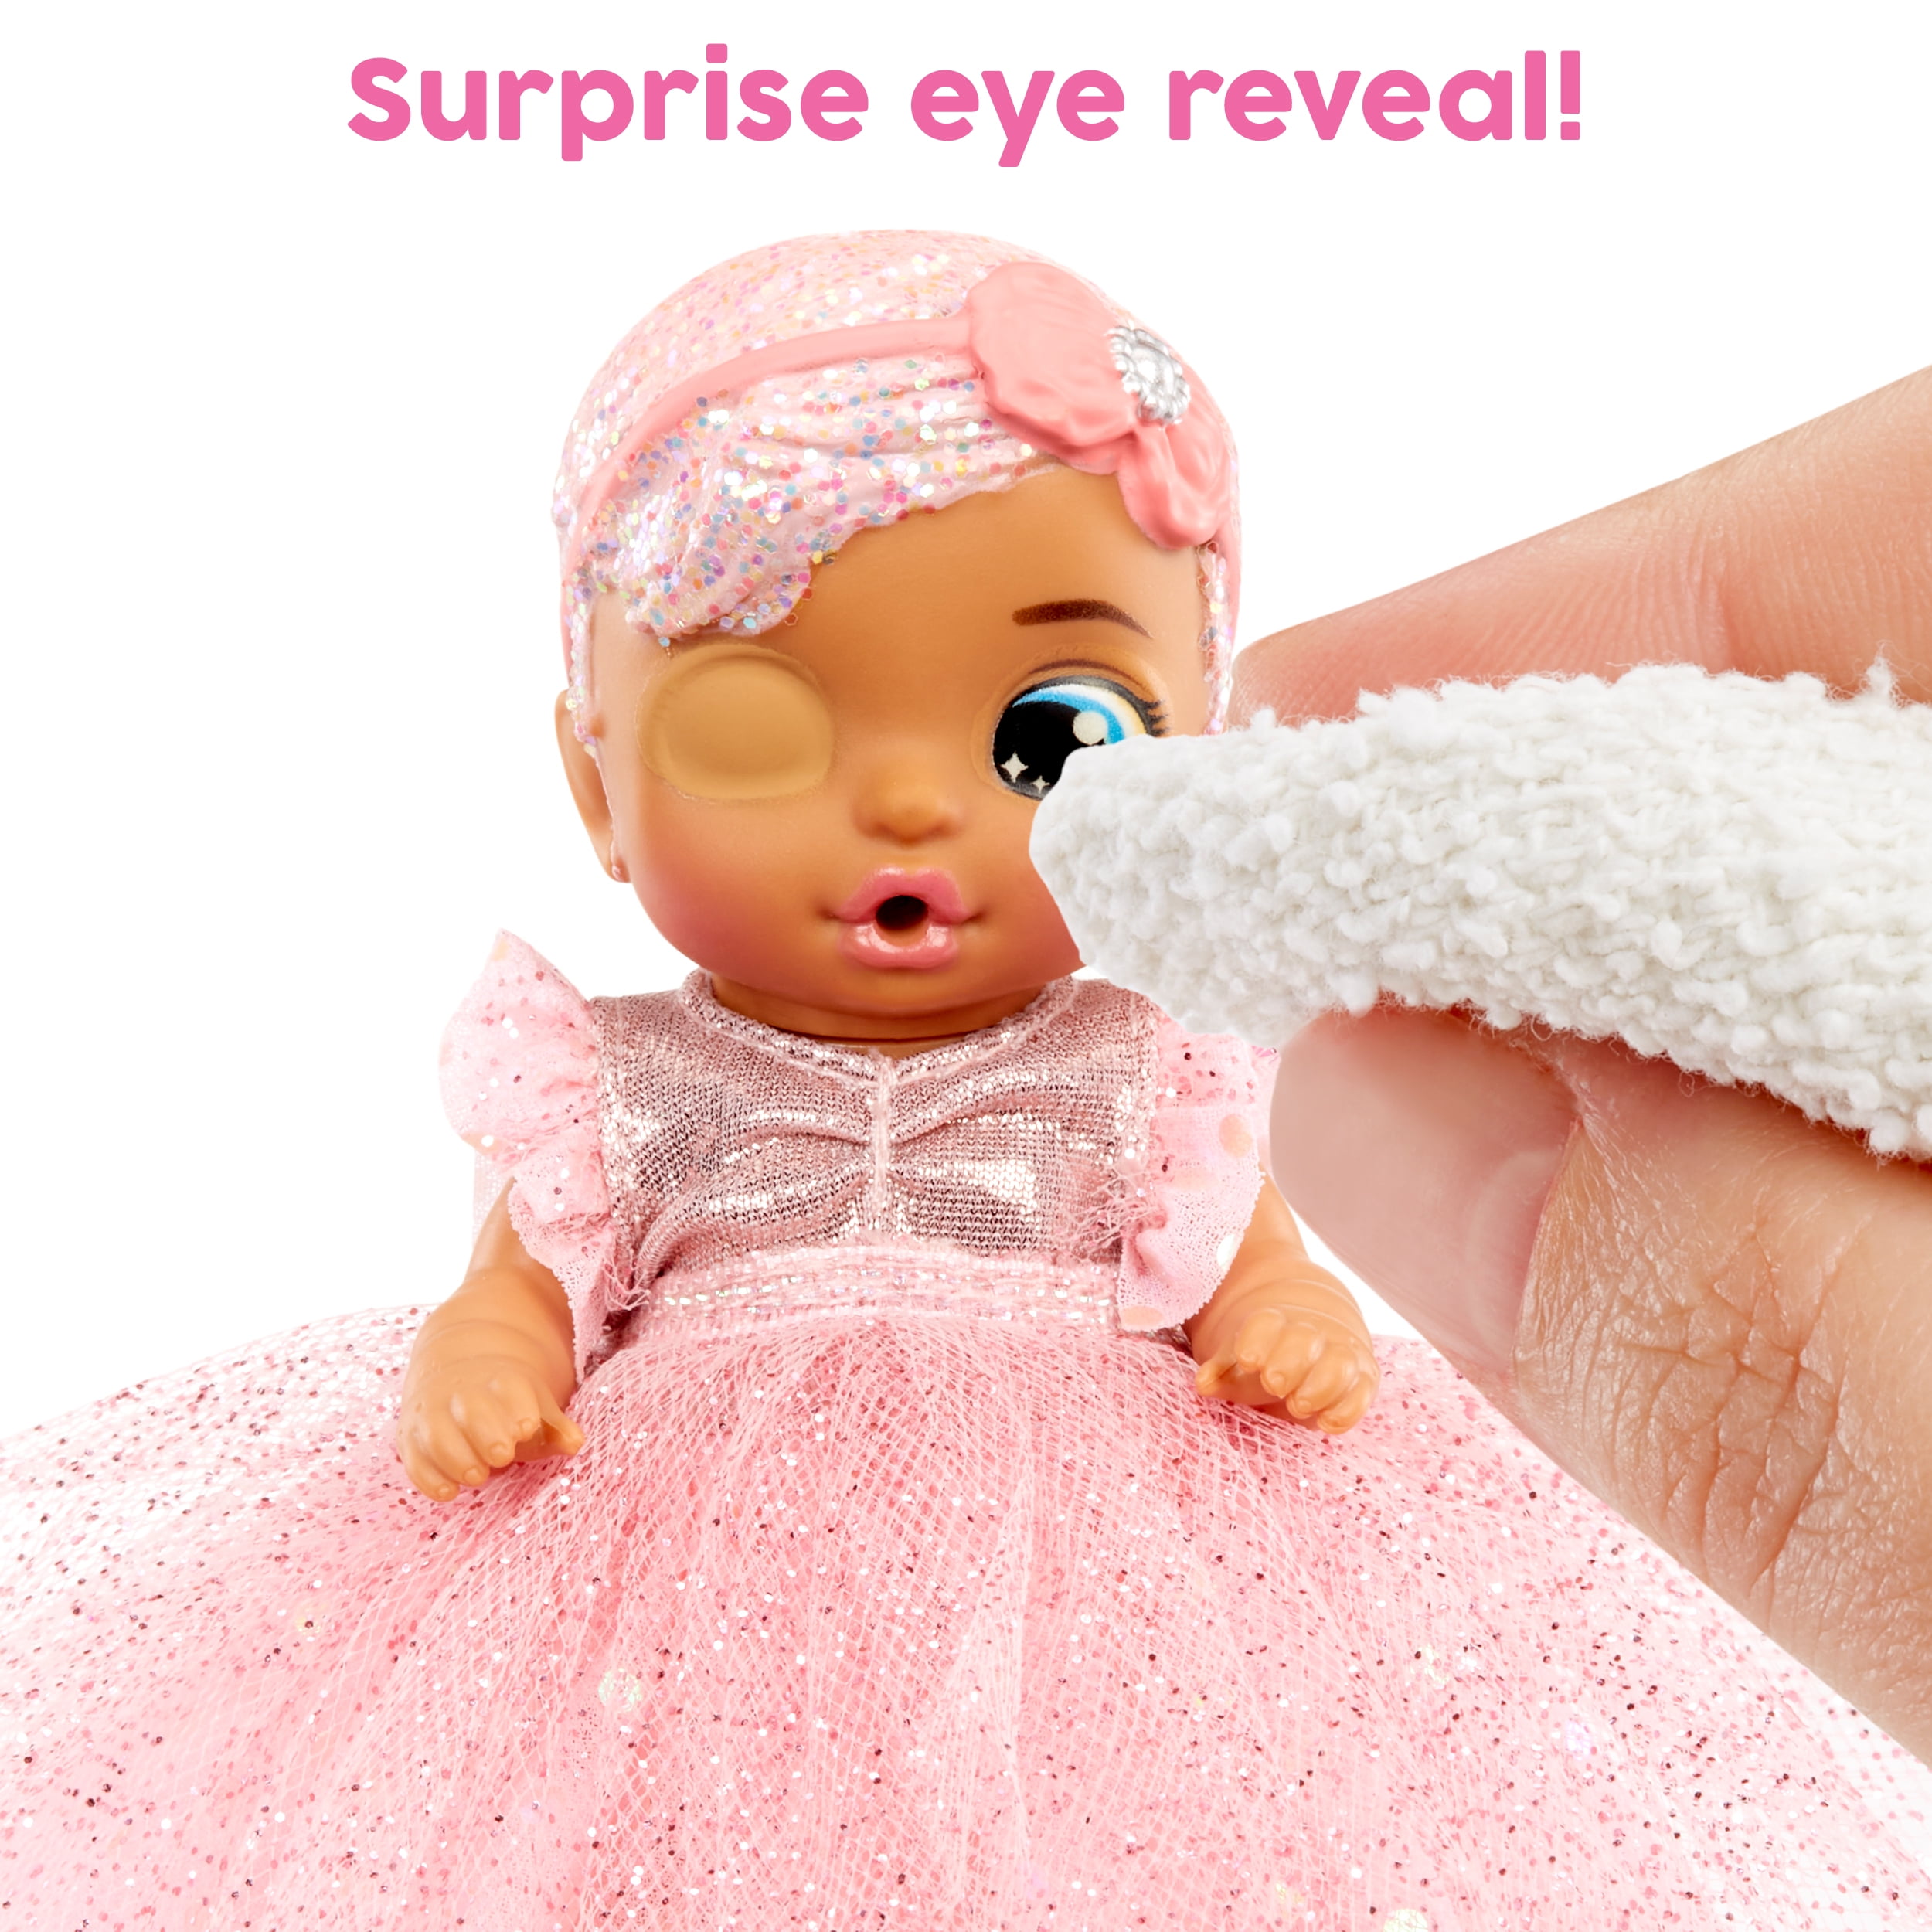 Baby Born Surprise collectible dolls: what are they like?